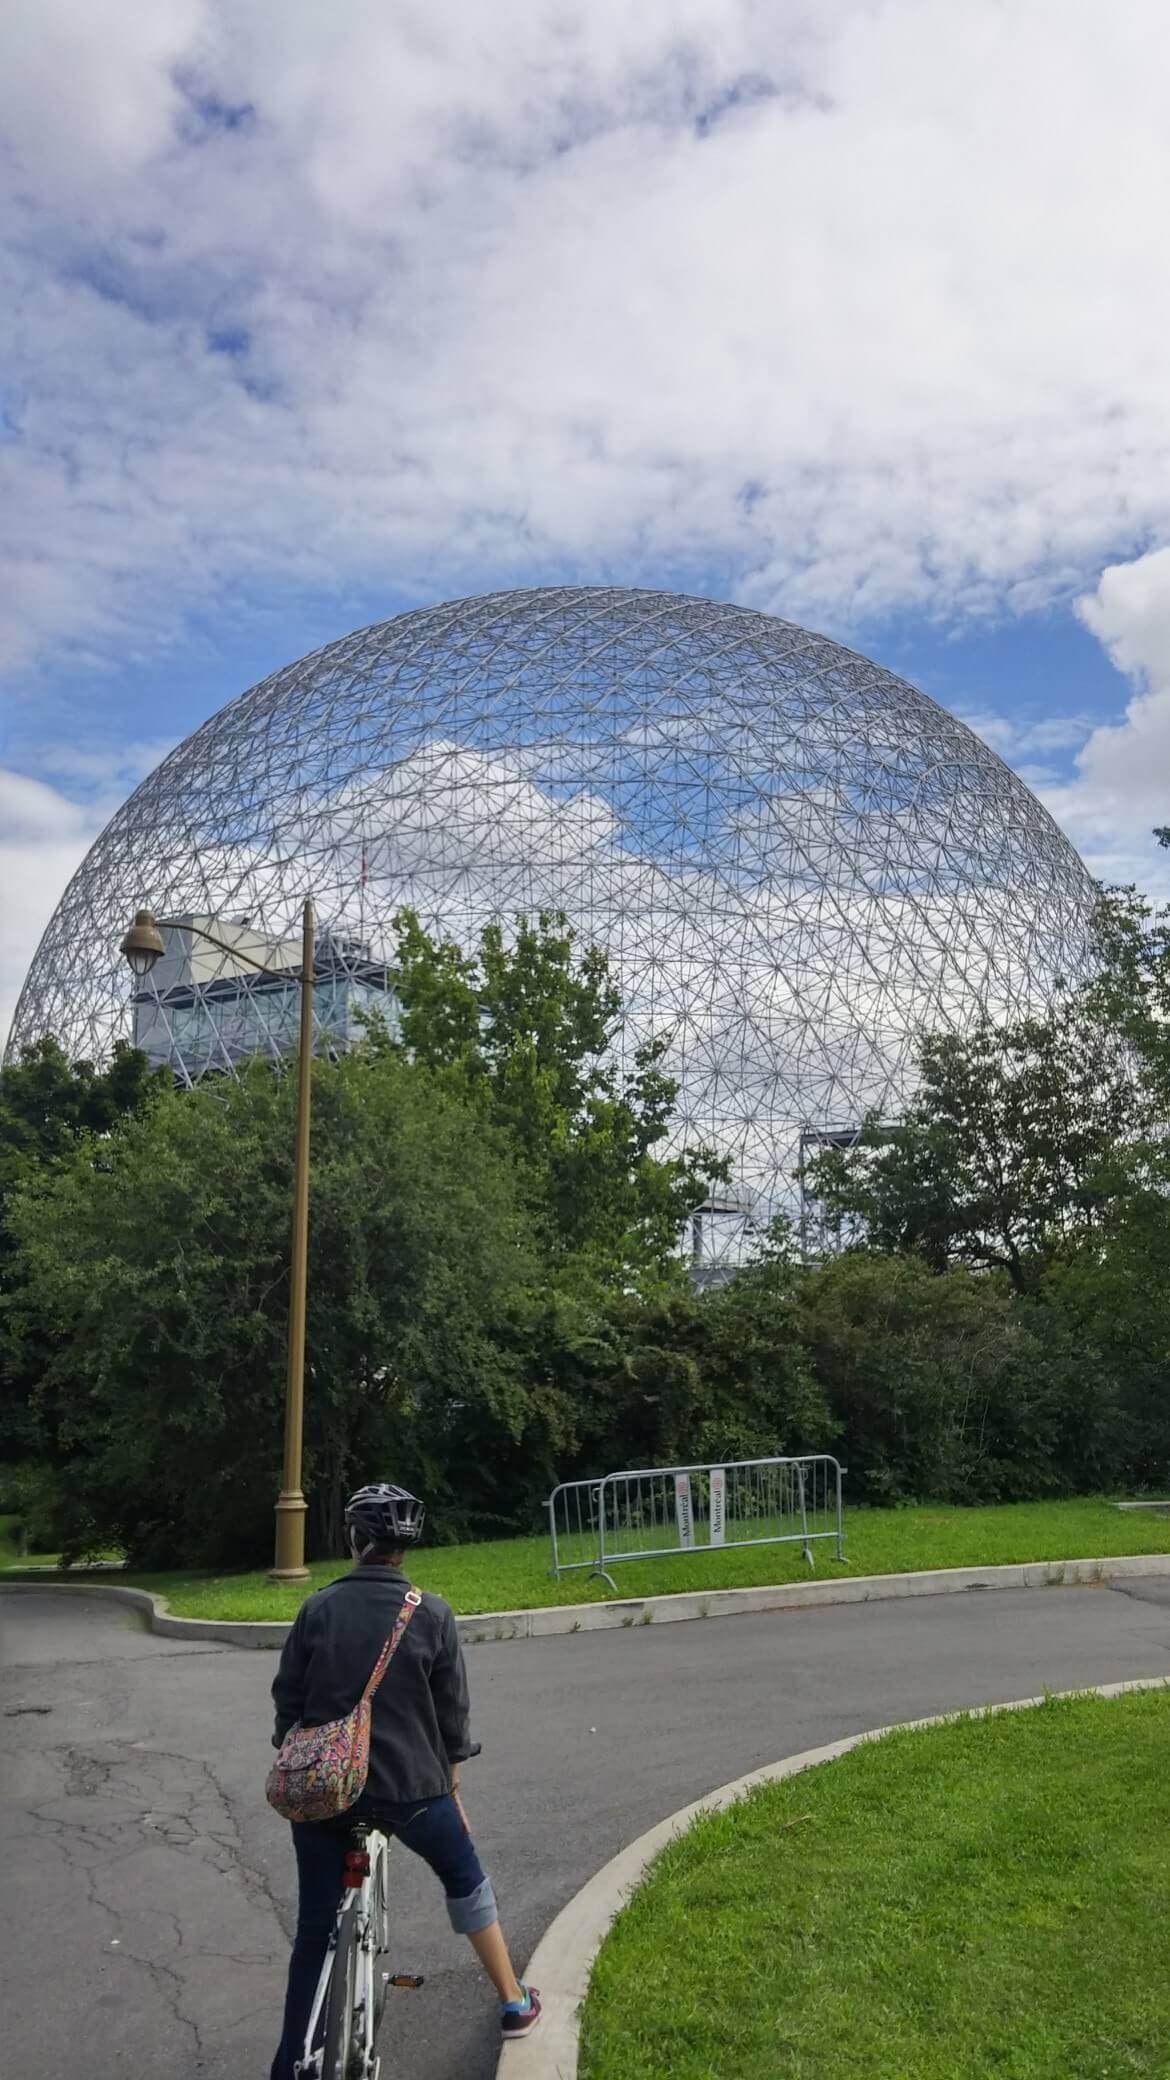 The Biosphere, a Buckminster Fuller type geodesic dome, was constructed as the US pavilion for Expo 67